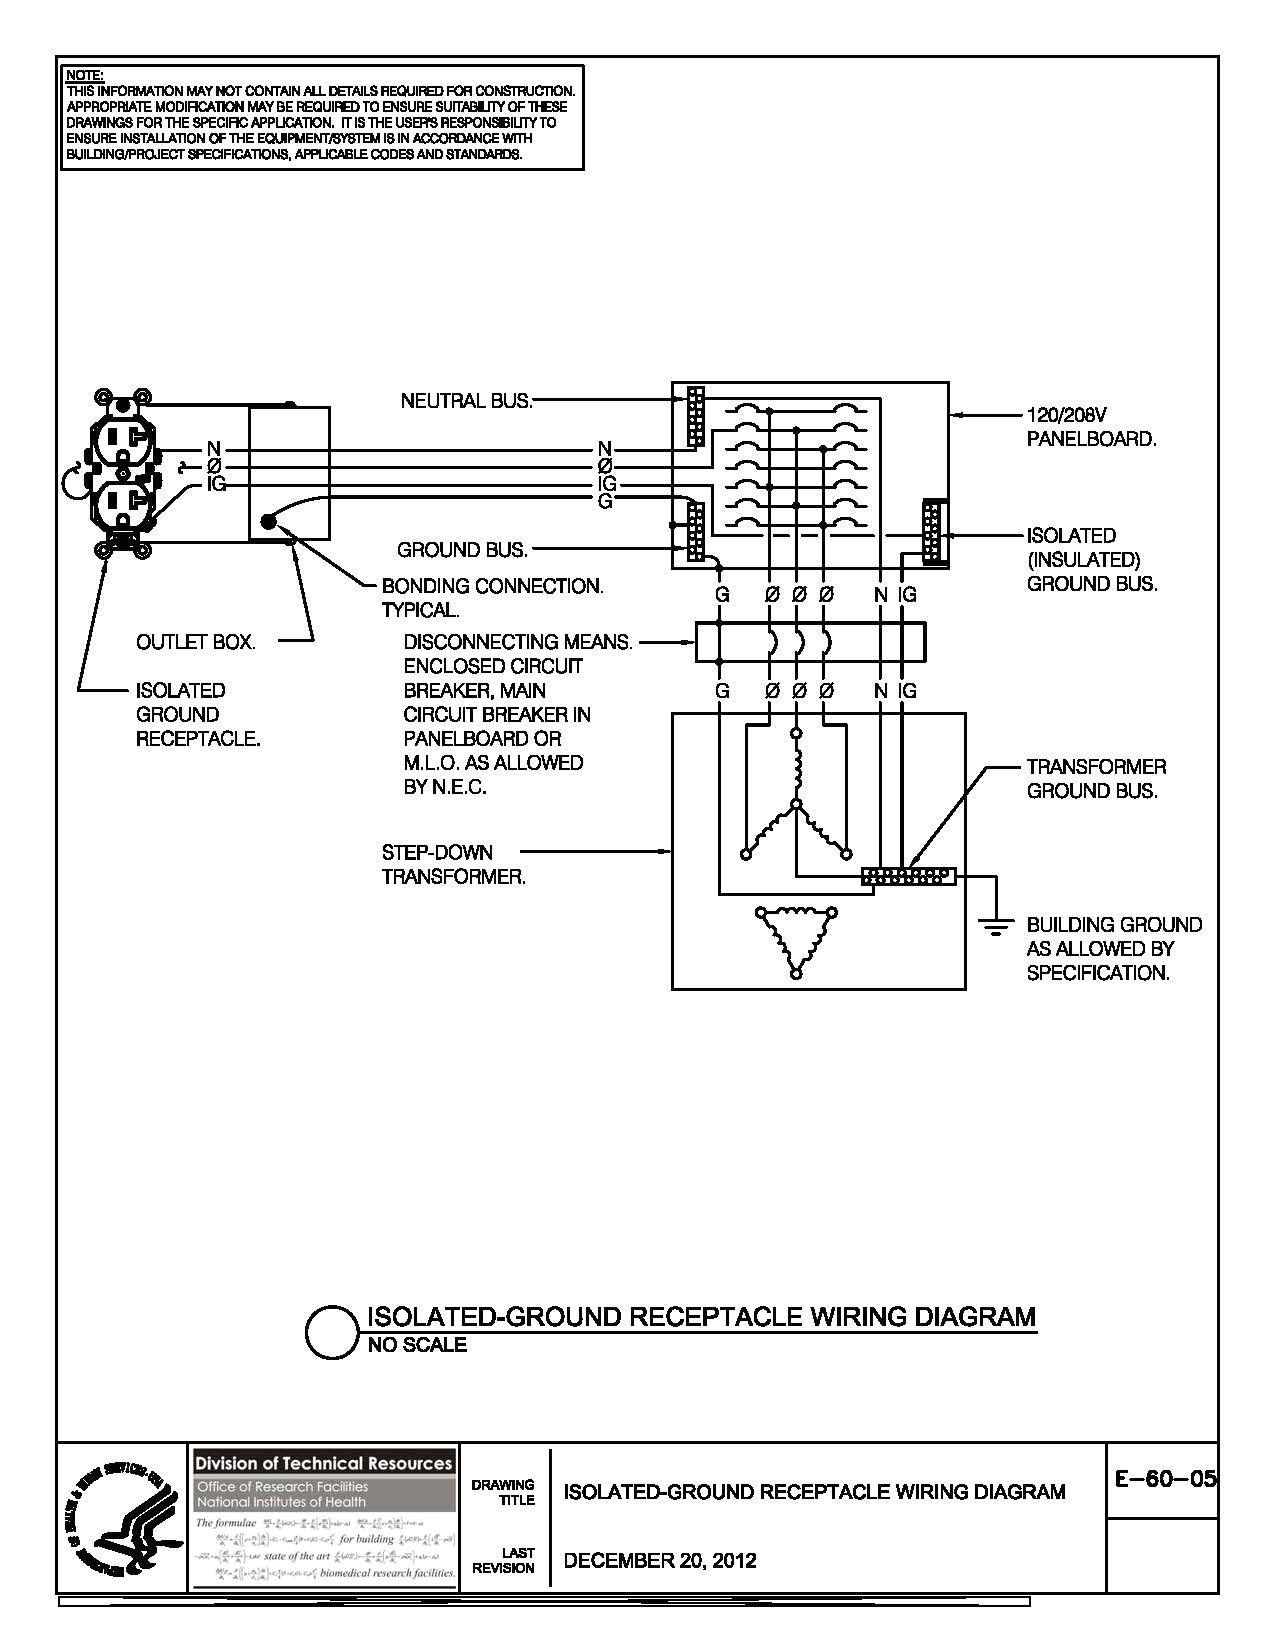 Combi Boiler thermostat Wiring Diagram New Combi Boiler thermostat Wiring Diagram Electrical